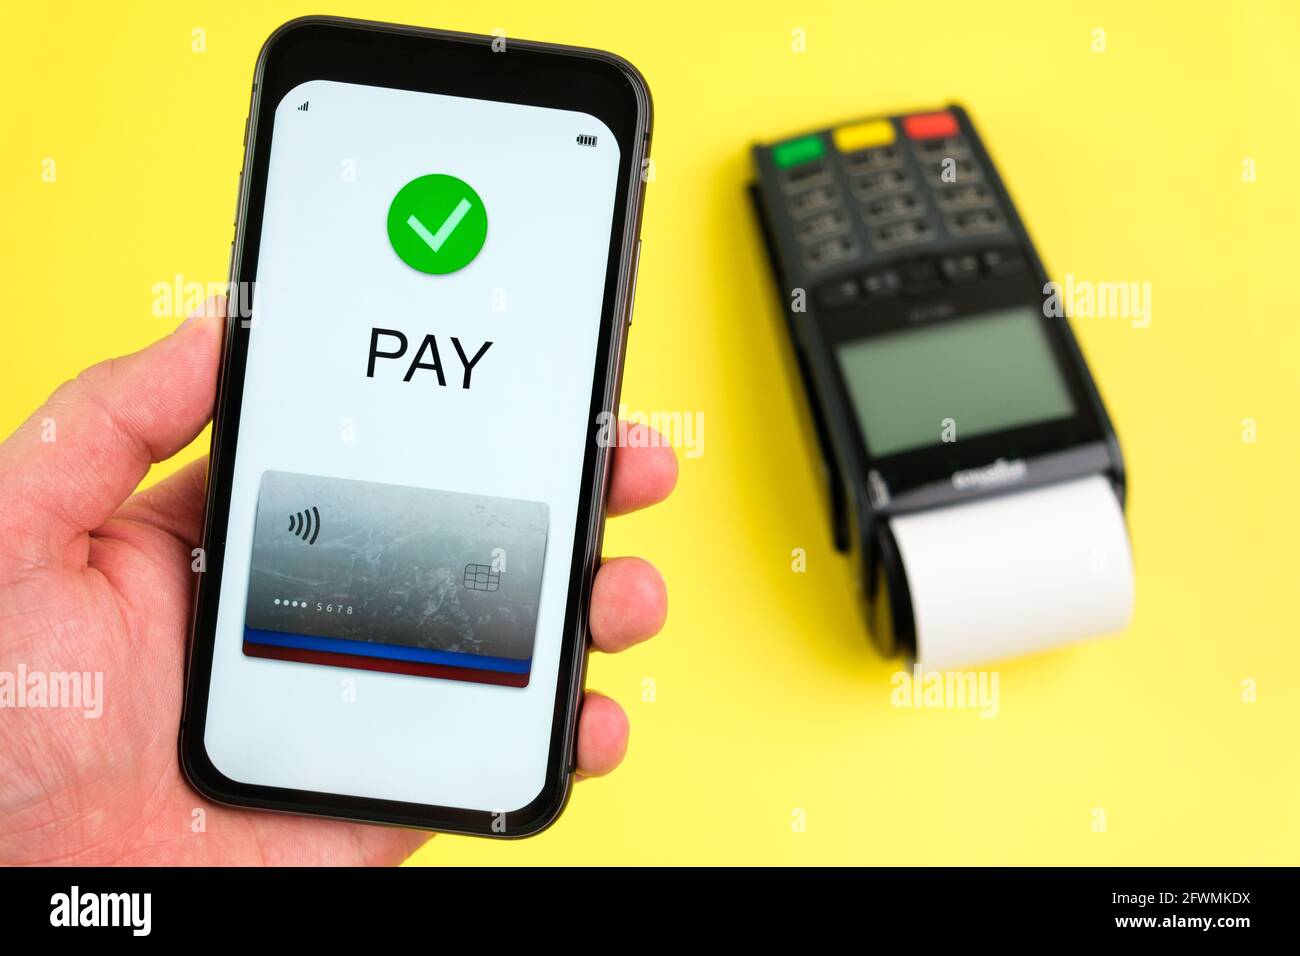 Contactless payment application on the screen of smartphone and pos terminal on the yellow background.  Stock Photo